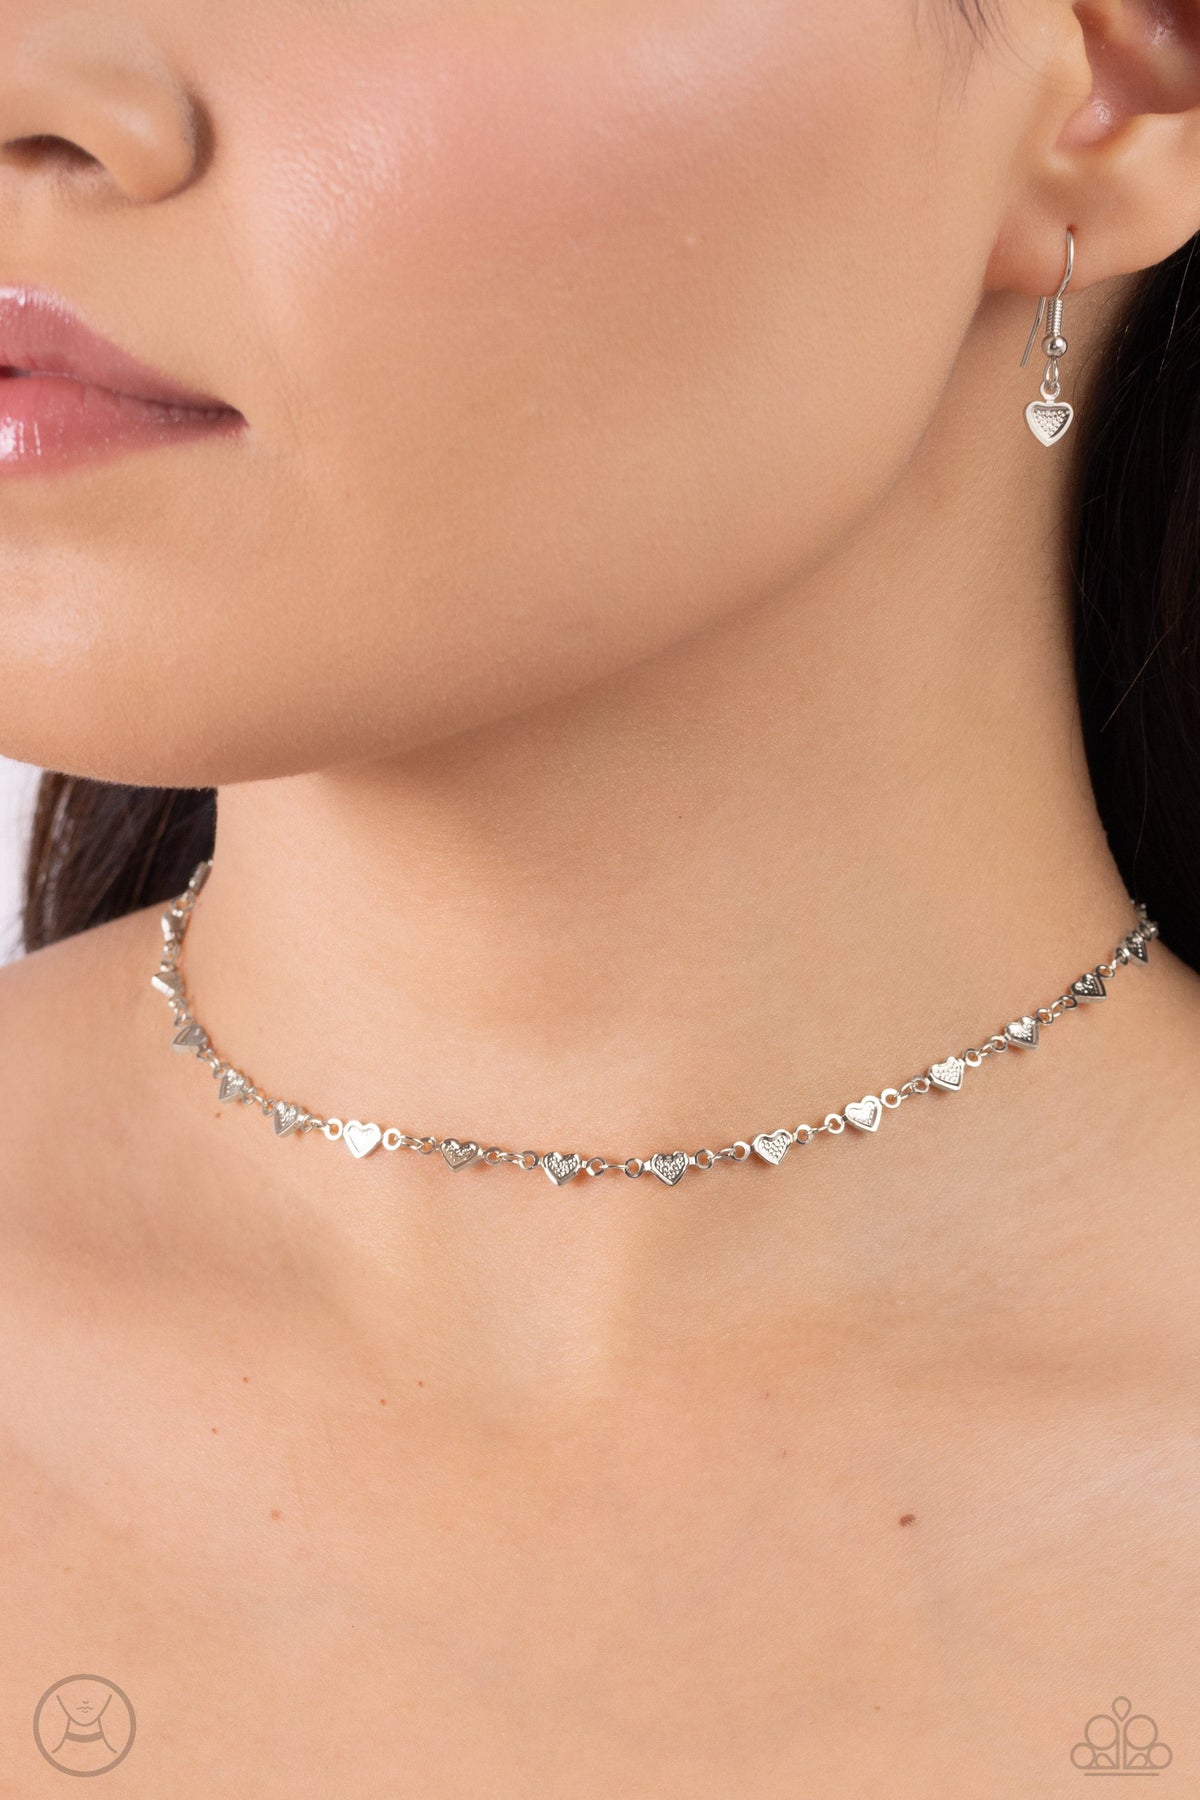 Cupid Catwalk Silver Heart Choker Necklace - Paparazzi Accessories-on model - CarasShop.com - $5 Jewelry by Cara Jewels